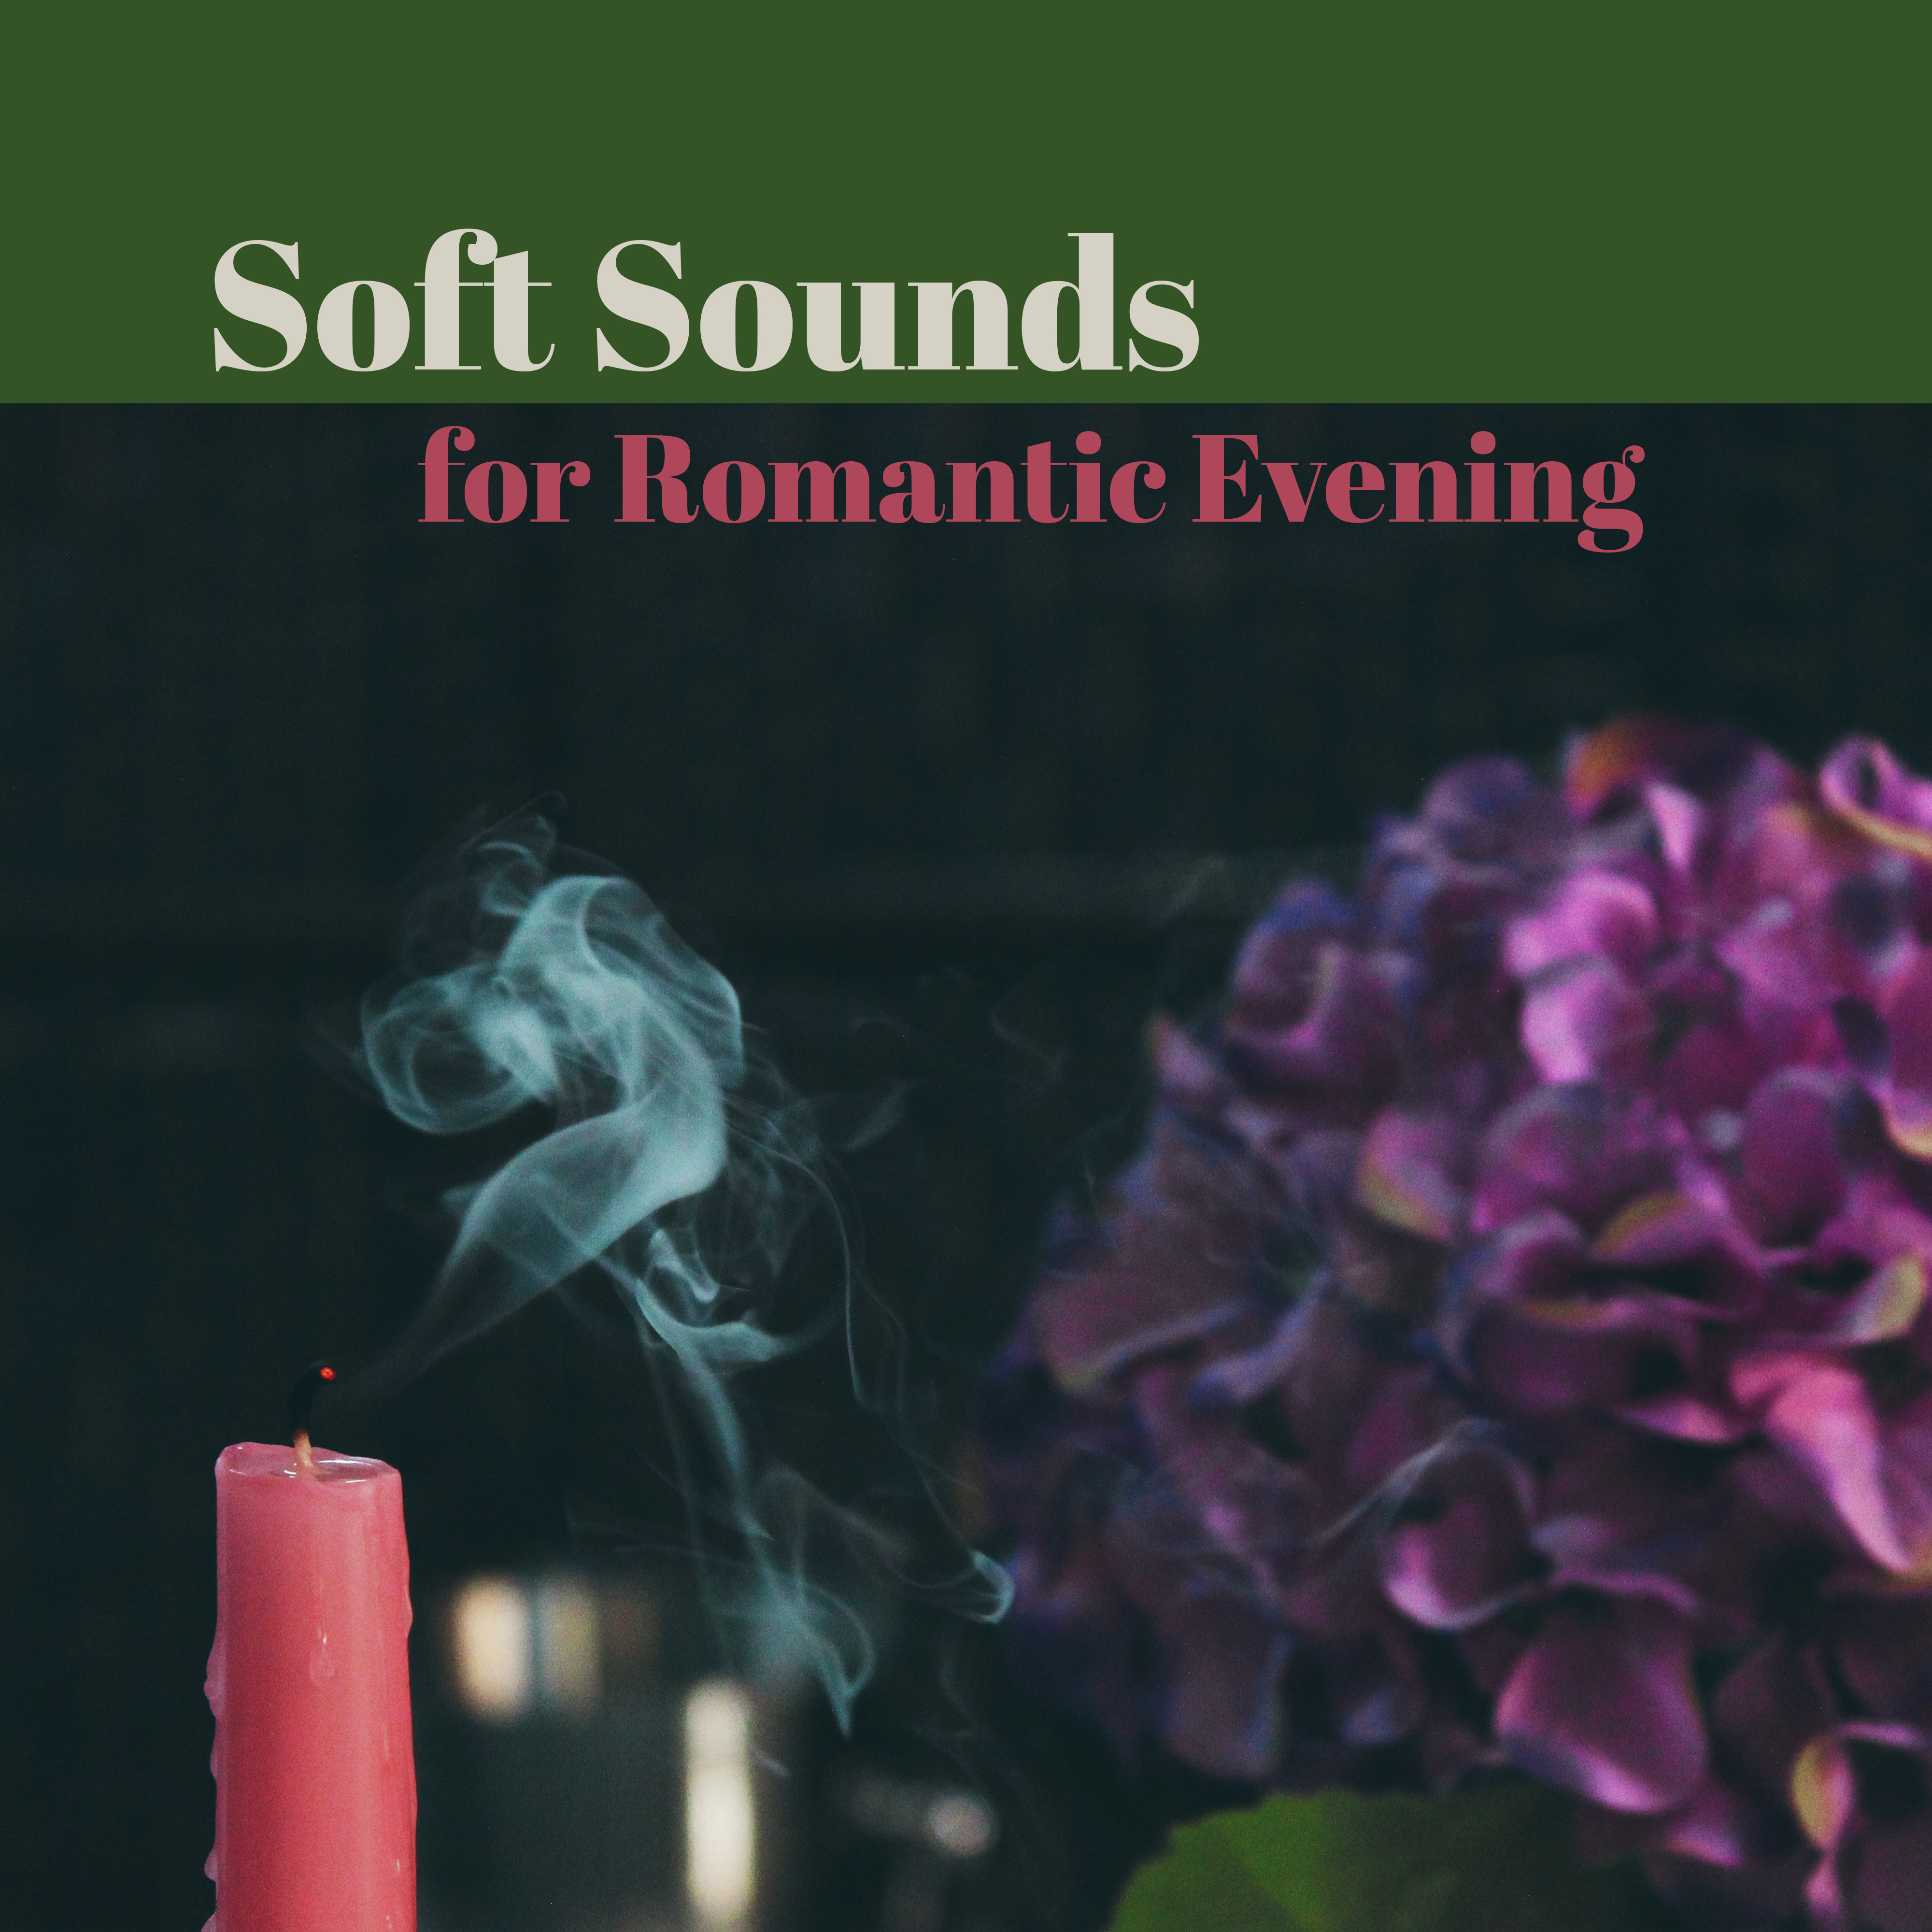 Soft Sounds for Romantic Evening  First Date, Romantic Dinner, Erotic Moves, Jazz Note